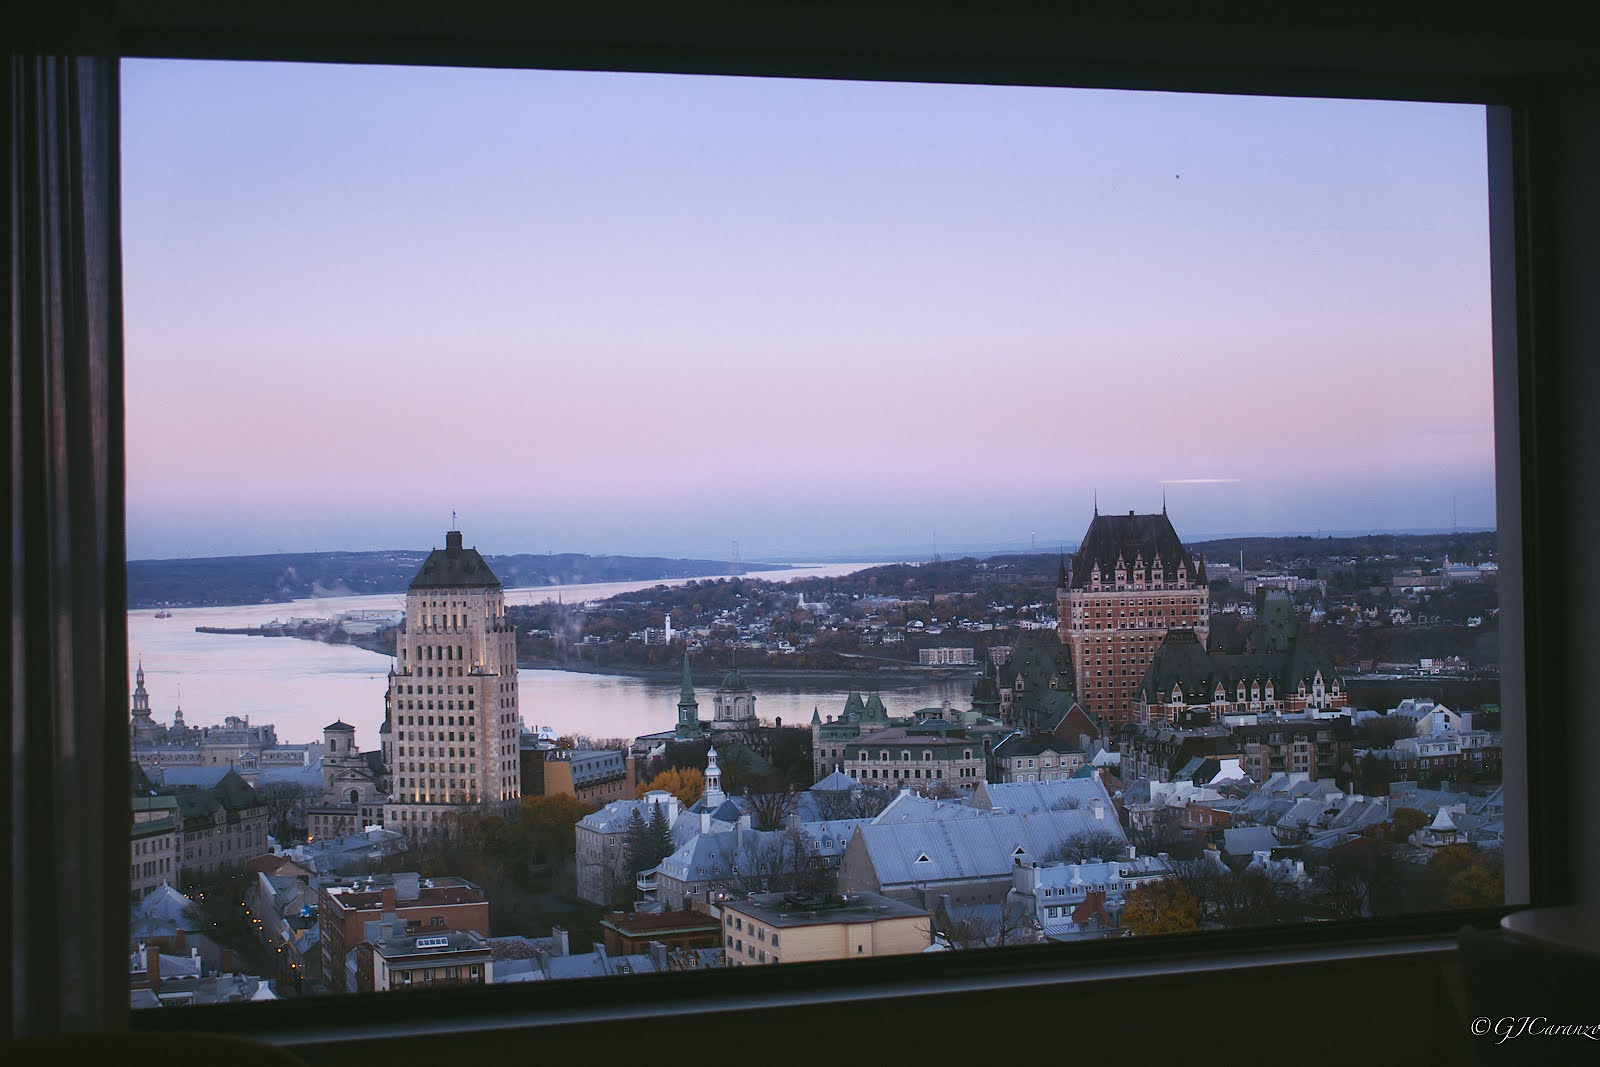 Travel Diary: Stunning Views of Old Quebec City, Canada from Hilton Hotel